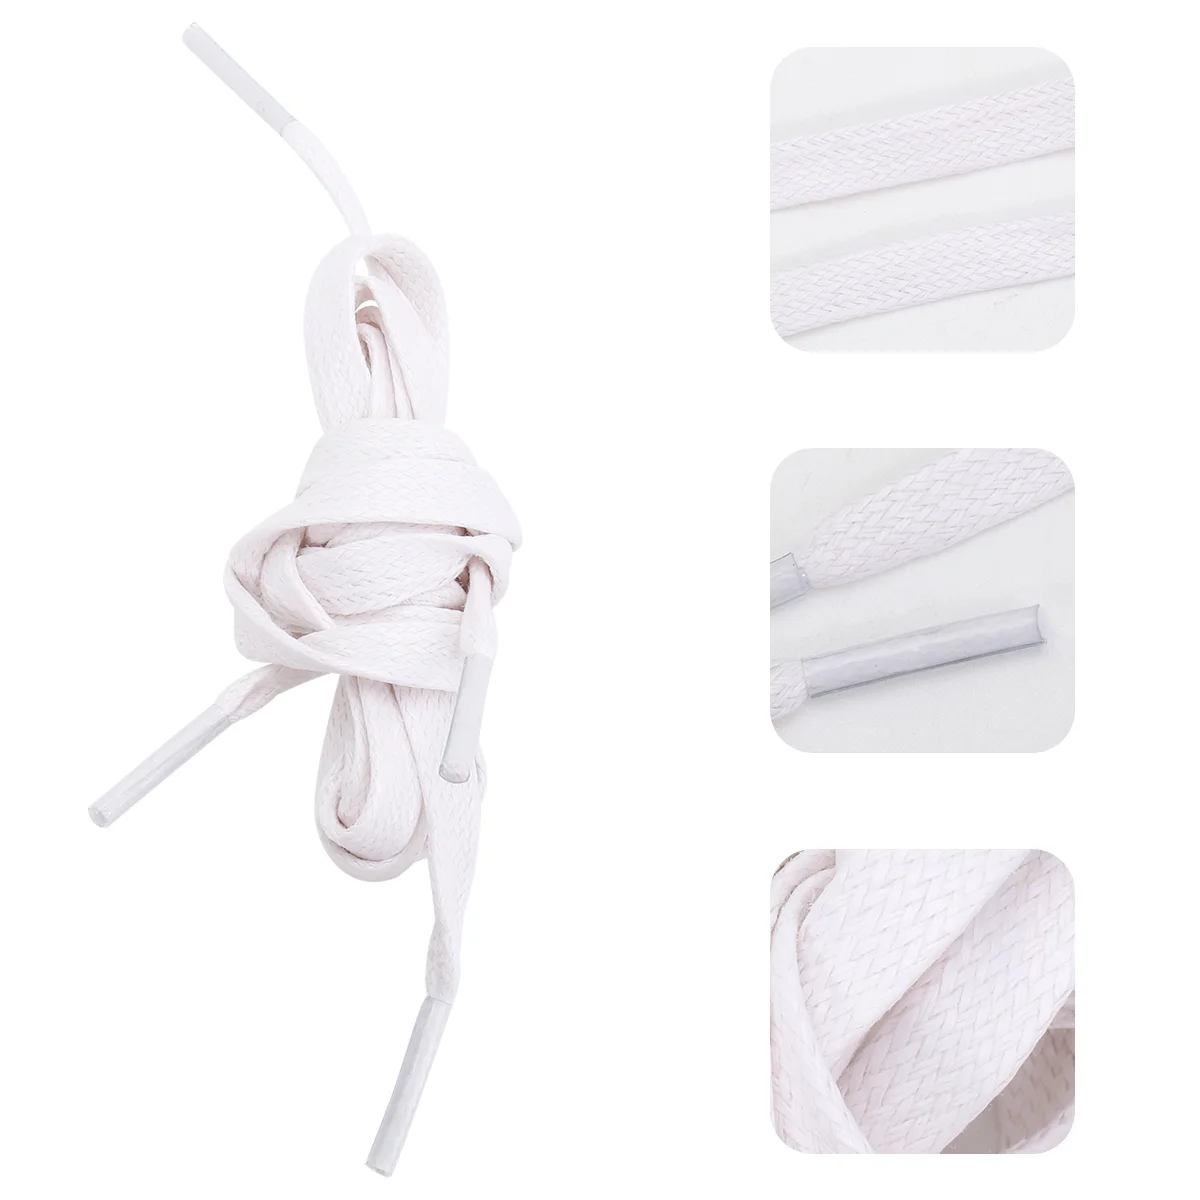 1 Pair Waxed Cotton Shoelace Casual Shoe Tie Flat Shoelaces Sneakers Shoelace magnetic shoelaces no tie shoe laces sneakers elastic shoelace kids adult lazy quick press lock flat color matching shoe strings